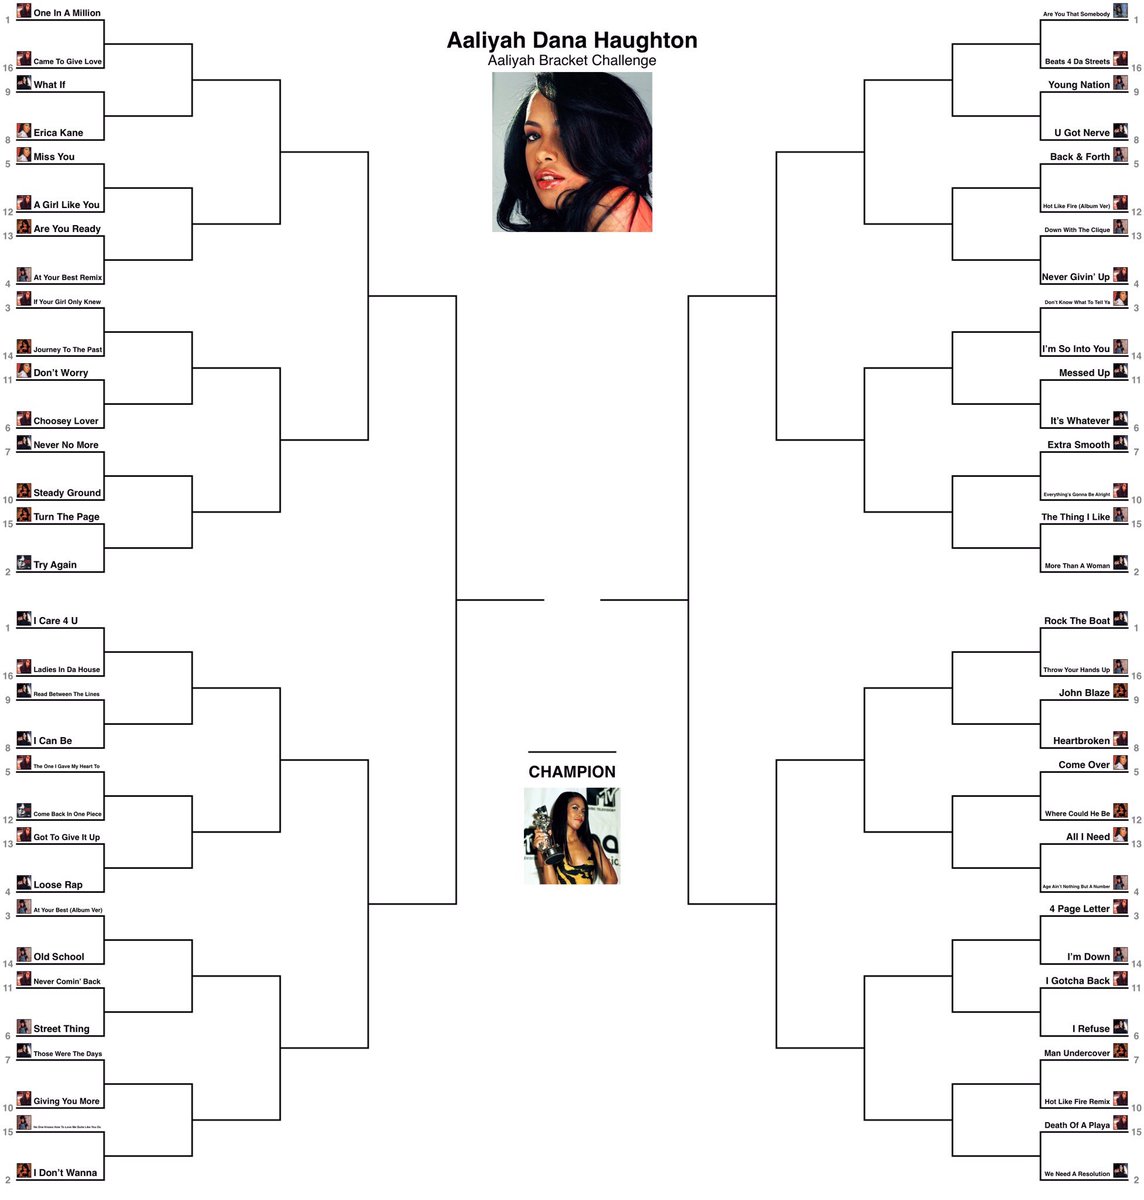 Aaliyah Elimination Game !What song will win ?  #AaliyahBracket 